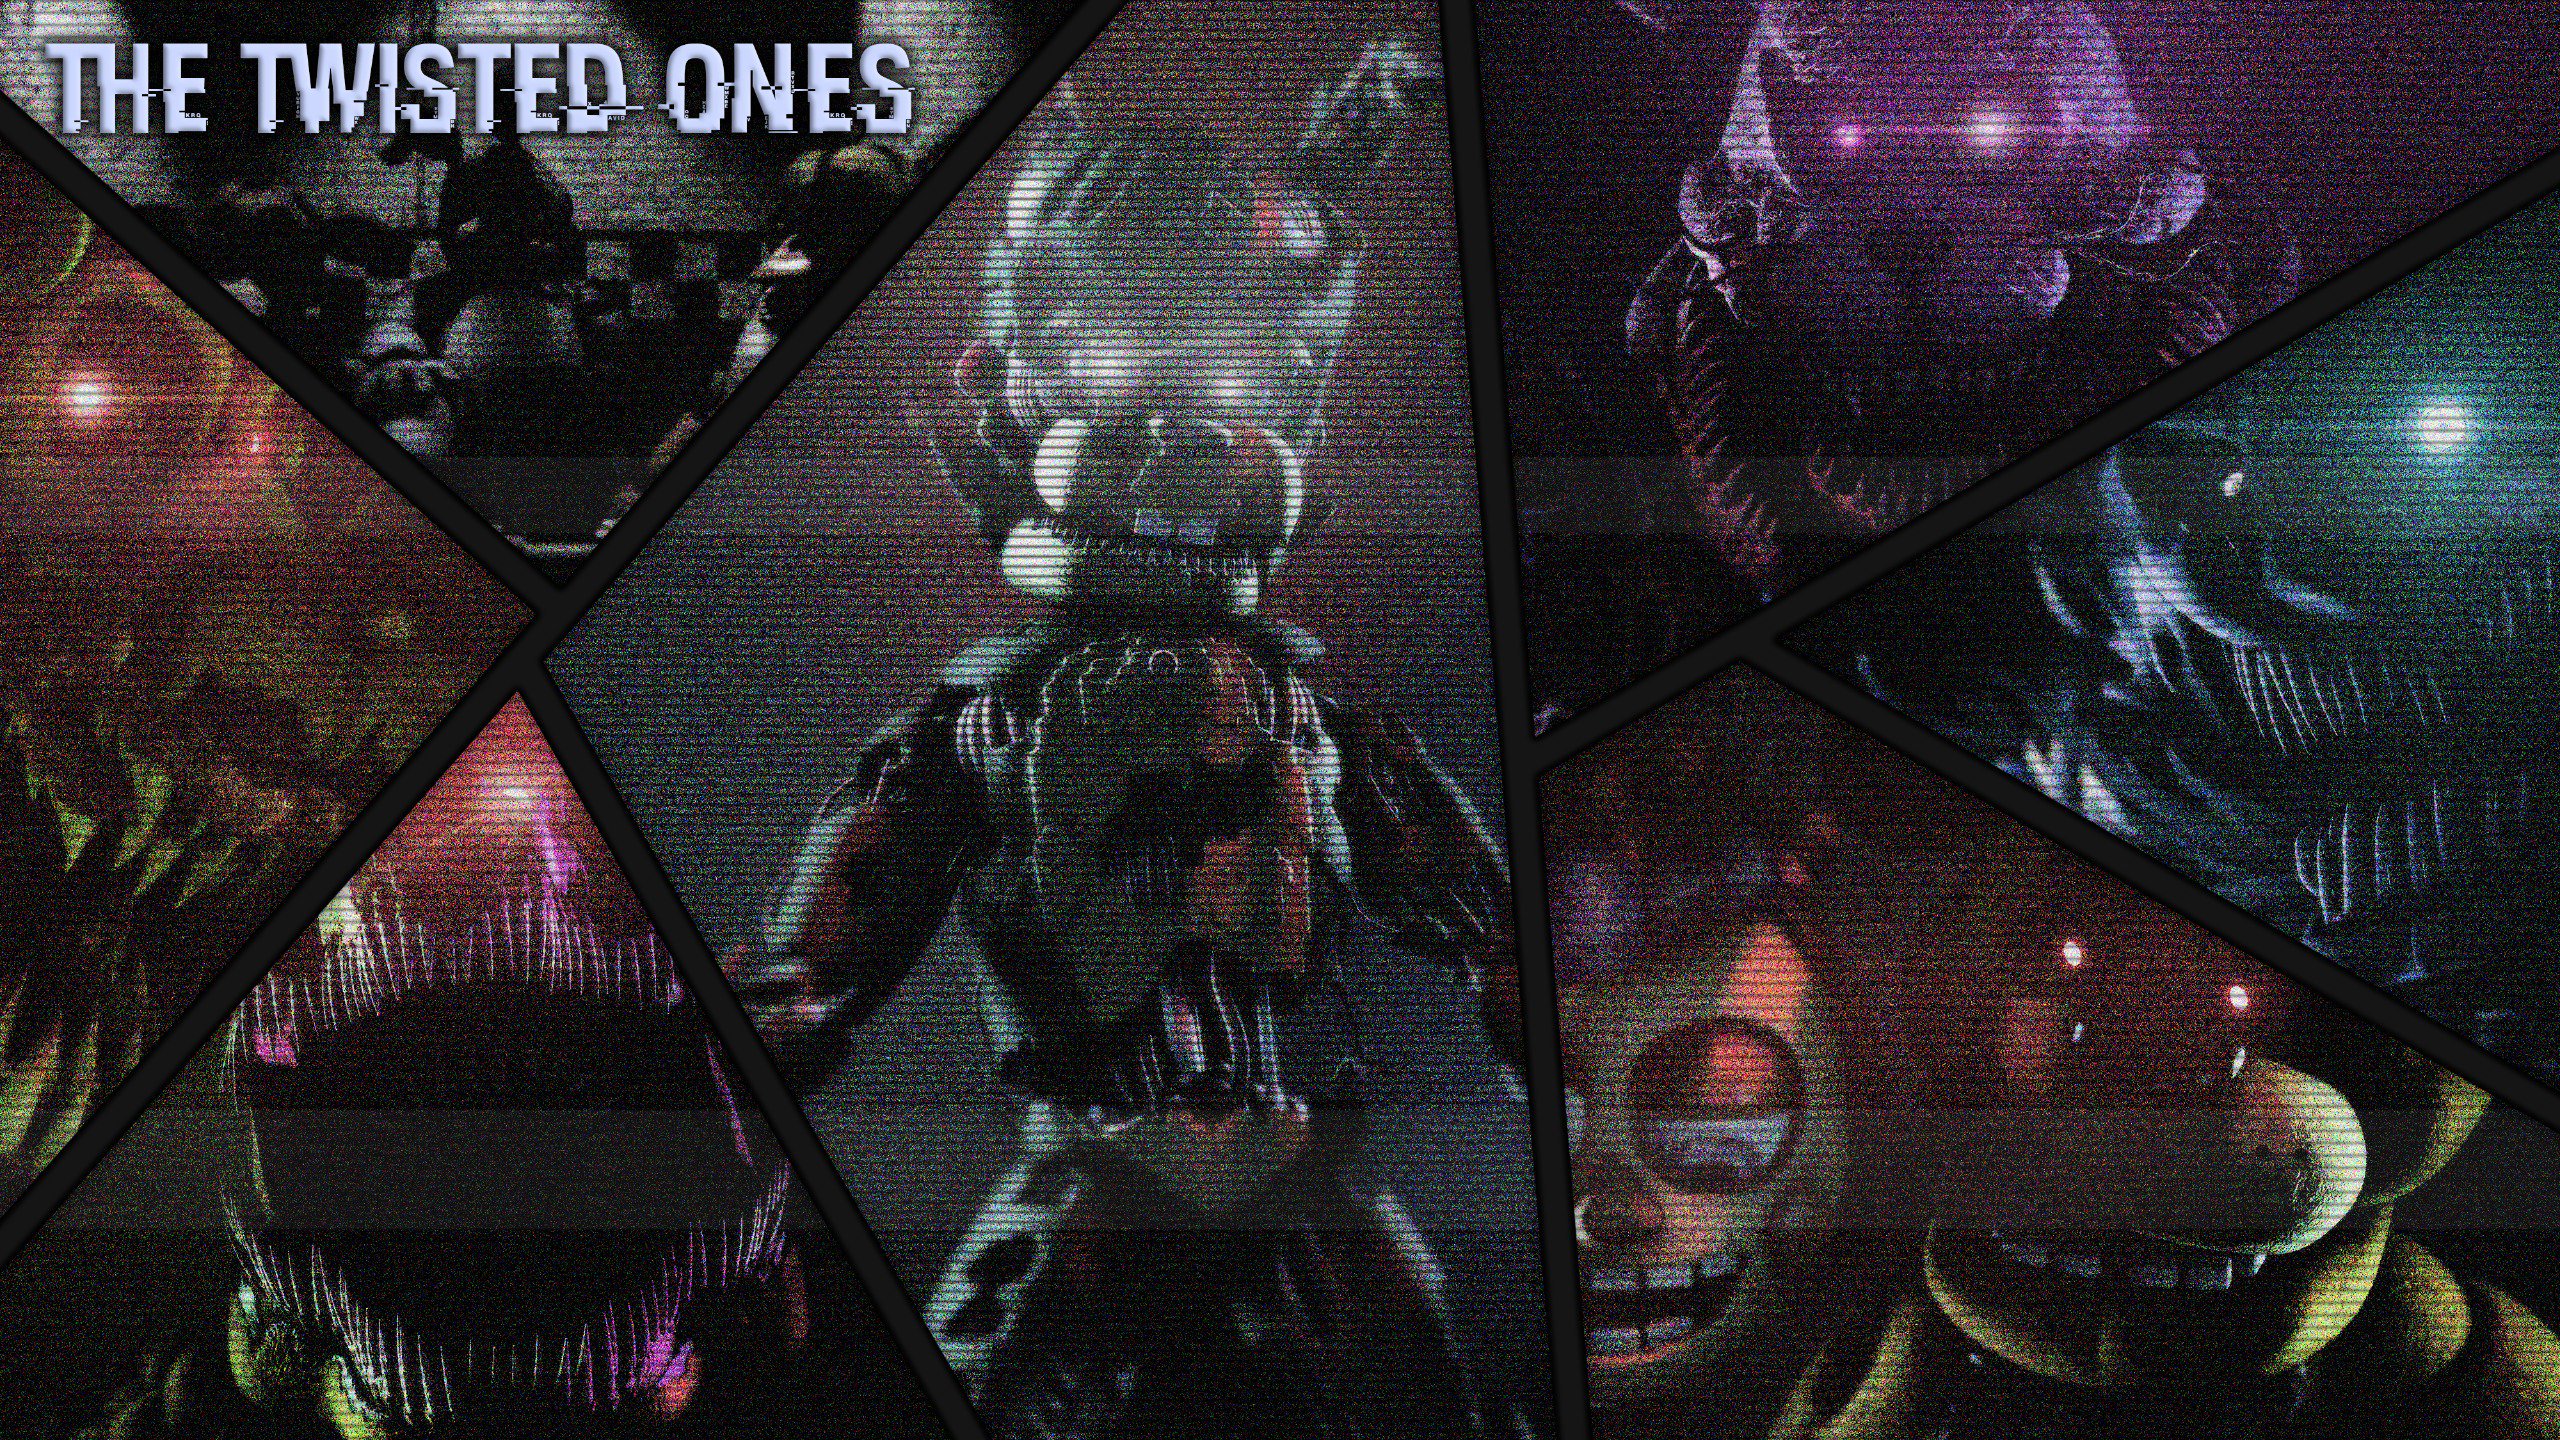 The Twisted Ones wallpaper. v2